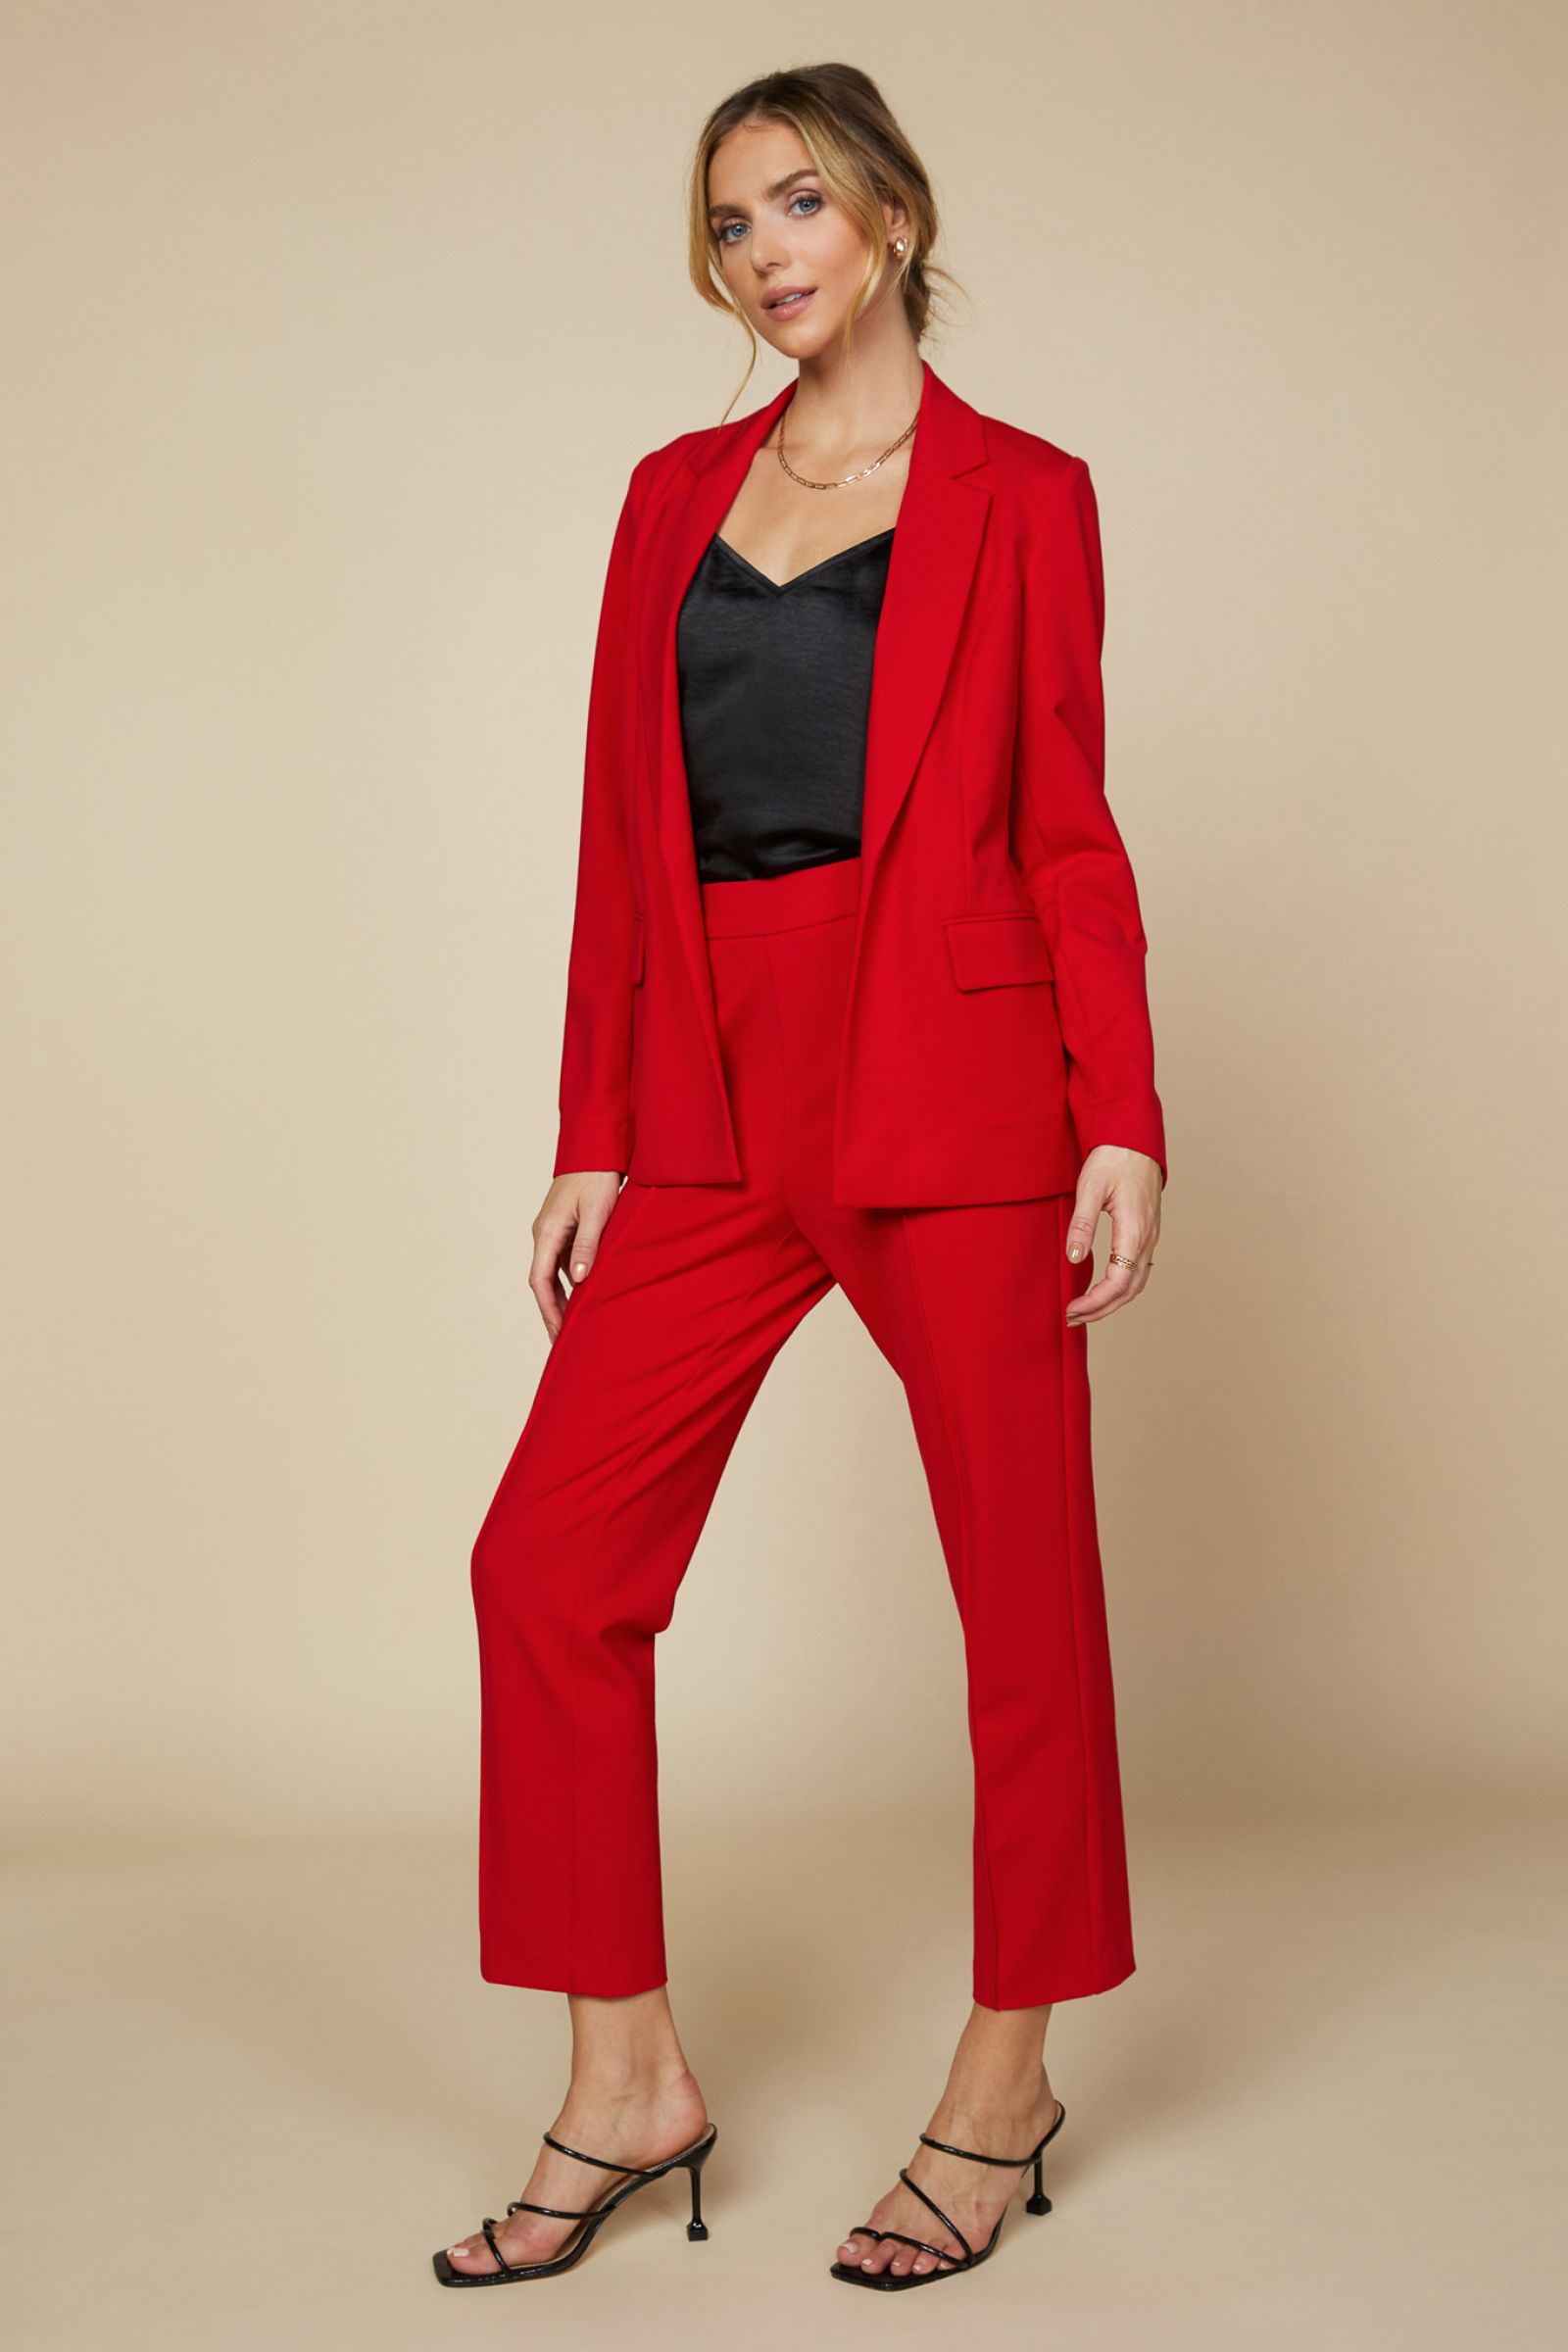 Knit Red Pintuck Pull Up Trouser Pants in Scarlet Red is Stretch and the perfect way to suit up in a comfortable way. 5% Spandex and elastic waist back adds some stretch to compliment your curves. Our red hot pants have side pockets and are a relaxed fit. 70% Rayon 25% Polyester 5% Spandex. Check out the jacket too. 